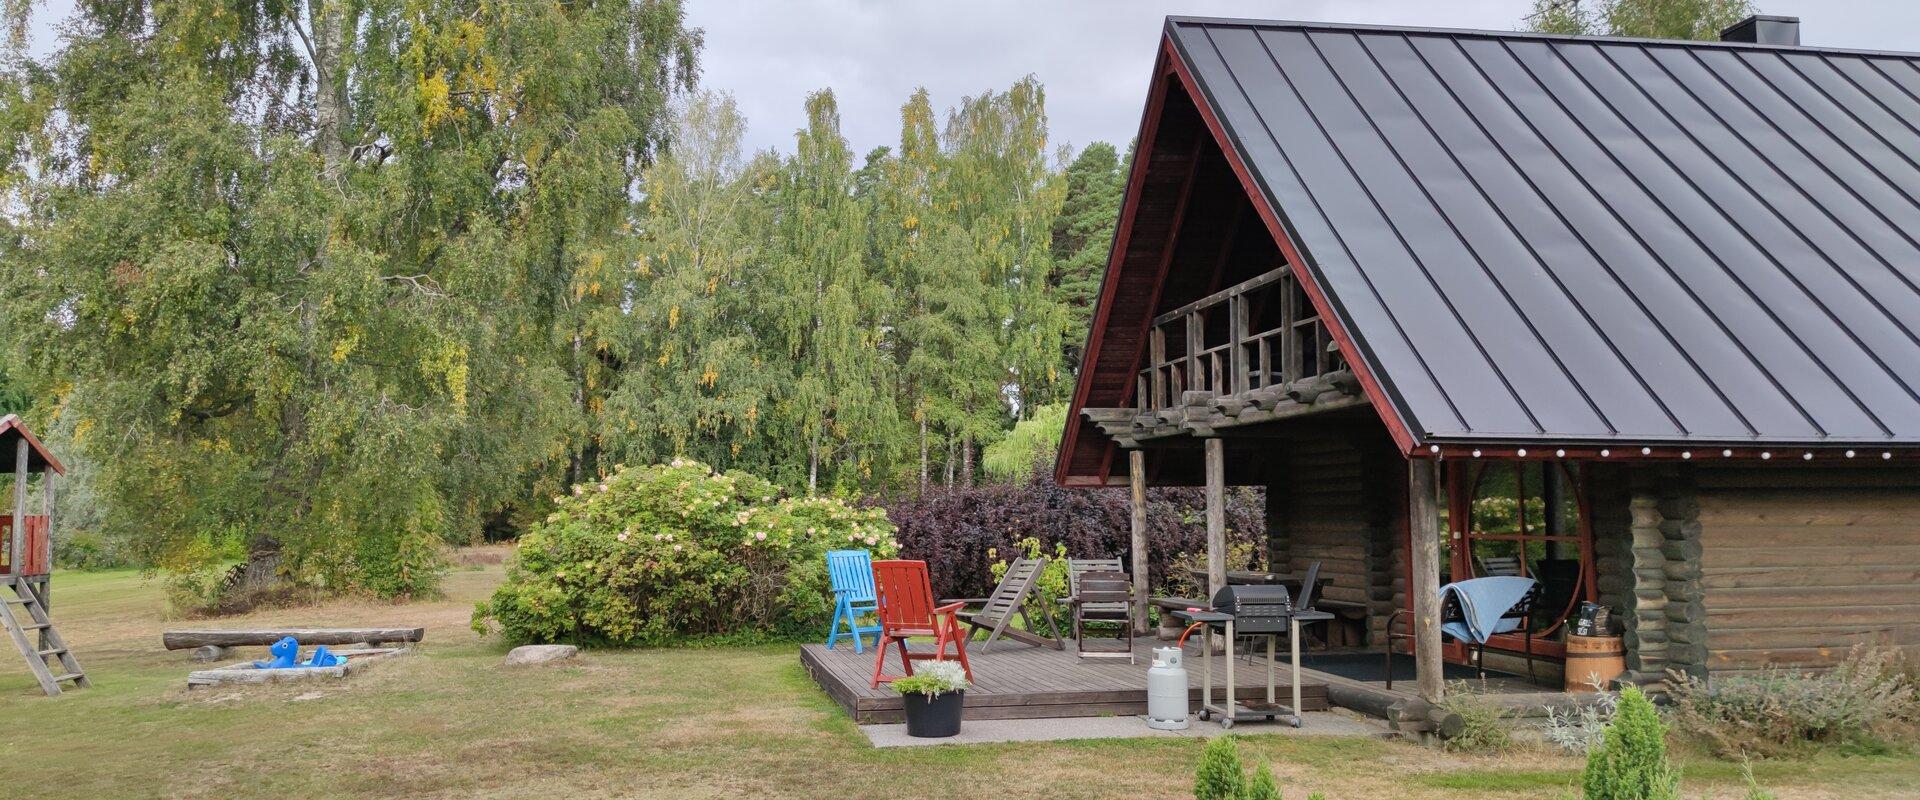 Markna Tourist Farm Sauna House - sunny terrace with barbecue. There is a playhouse and sandbox for children in front of the terrace.